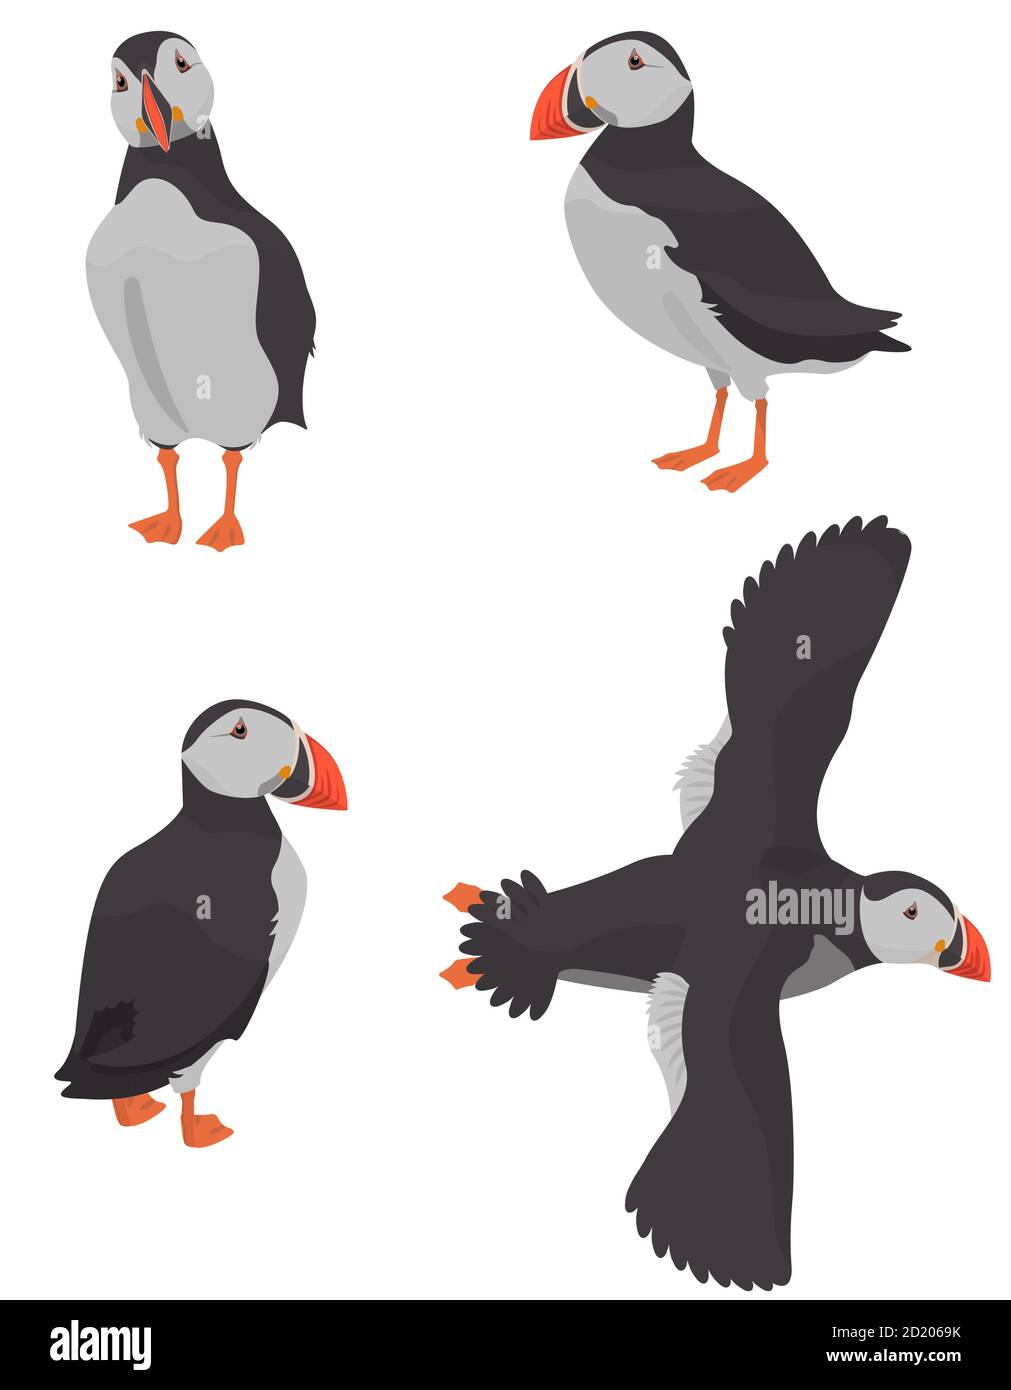 Atlantic puffin in different poses. Northern bird in cartoon style. Stock Vector